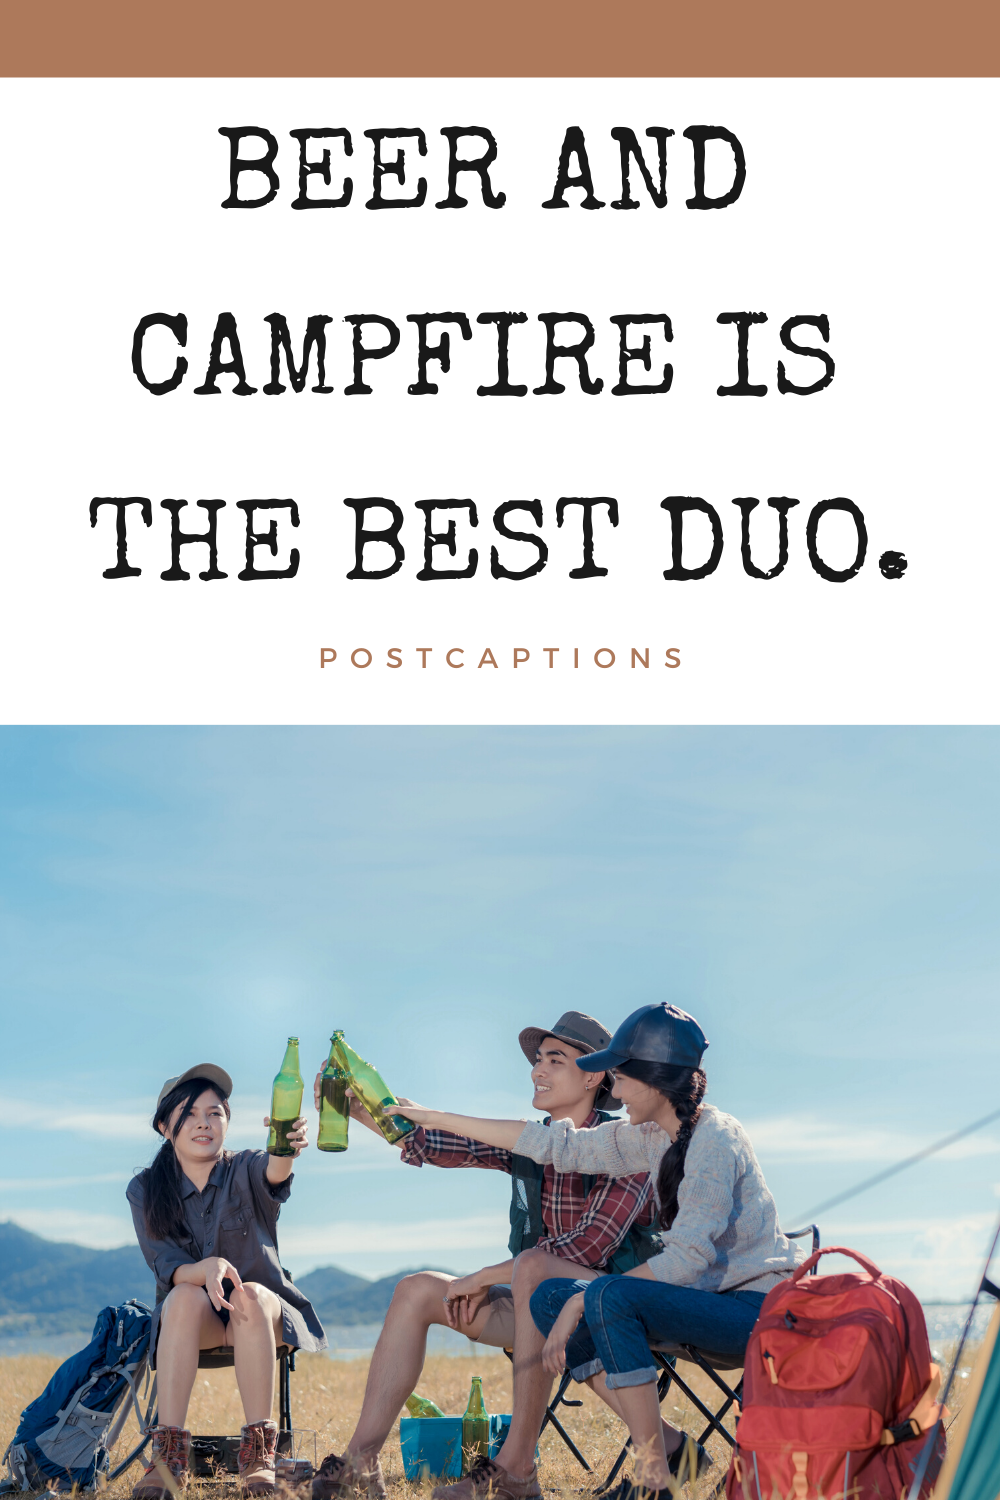 Funny camping captions